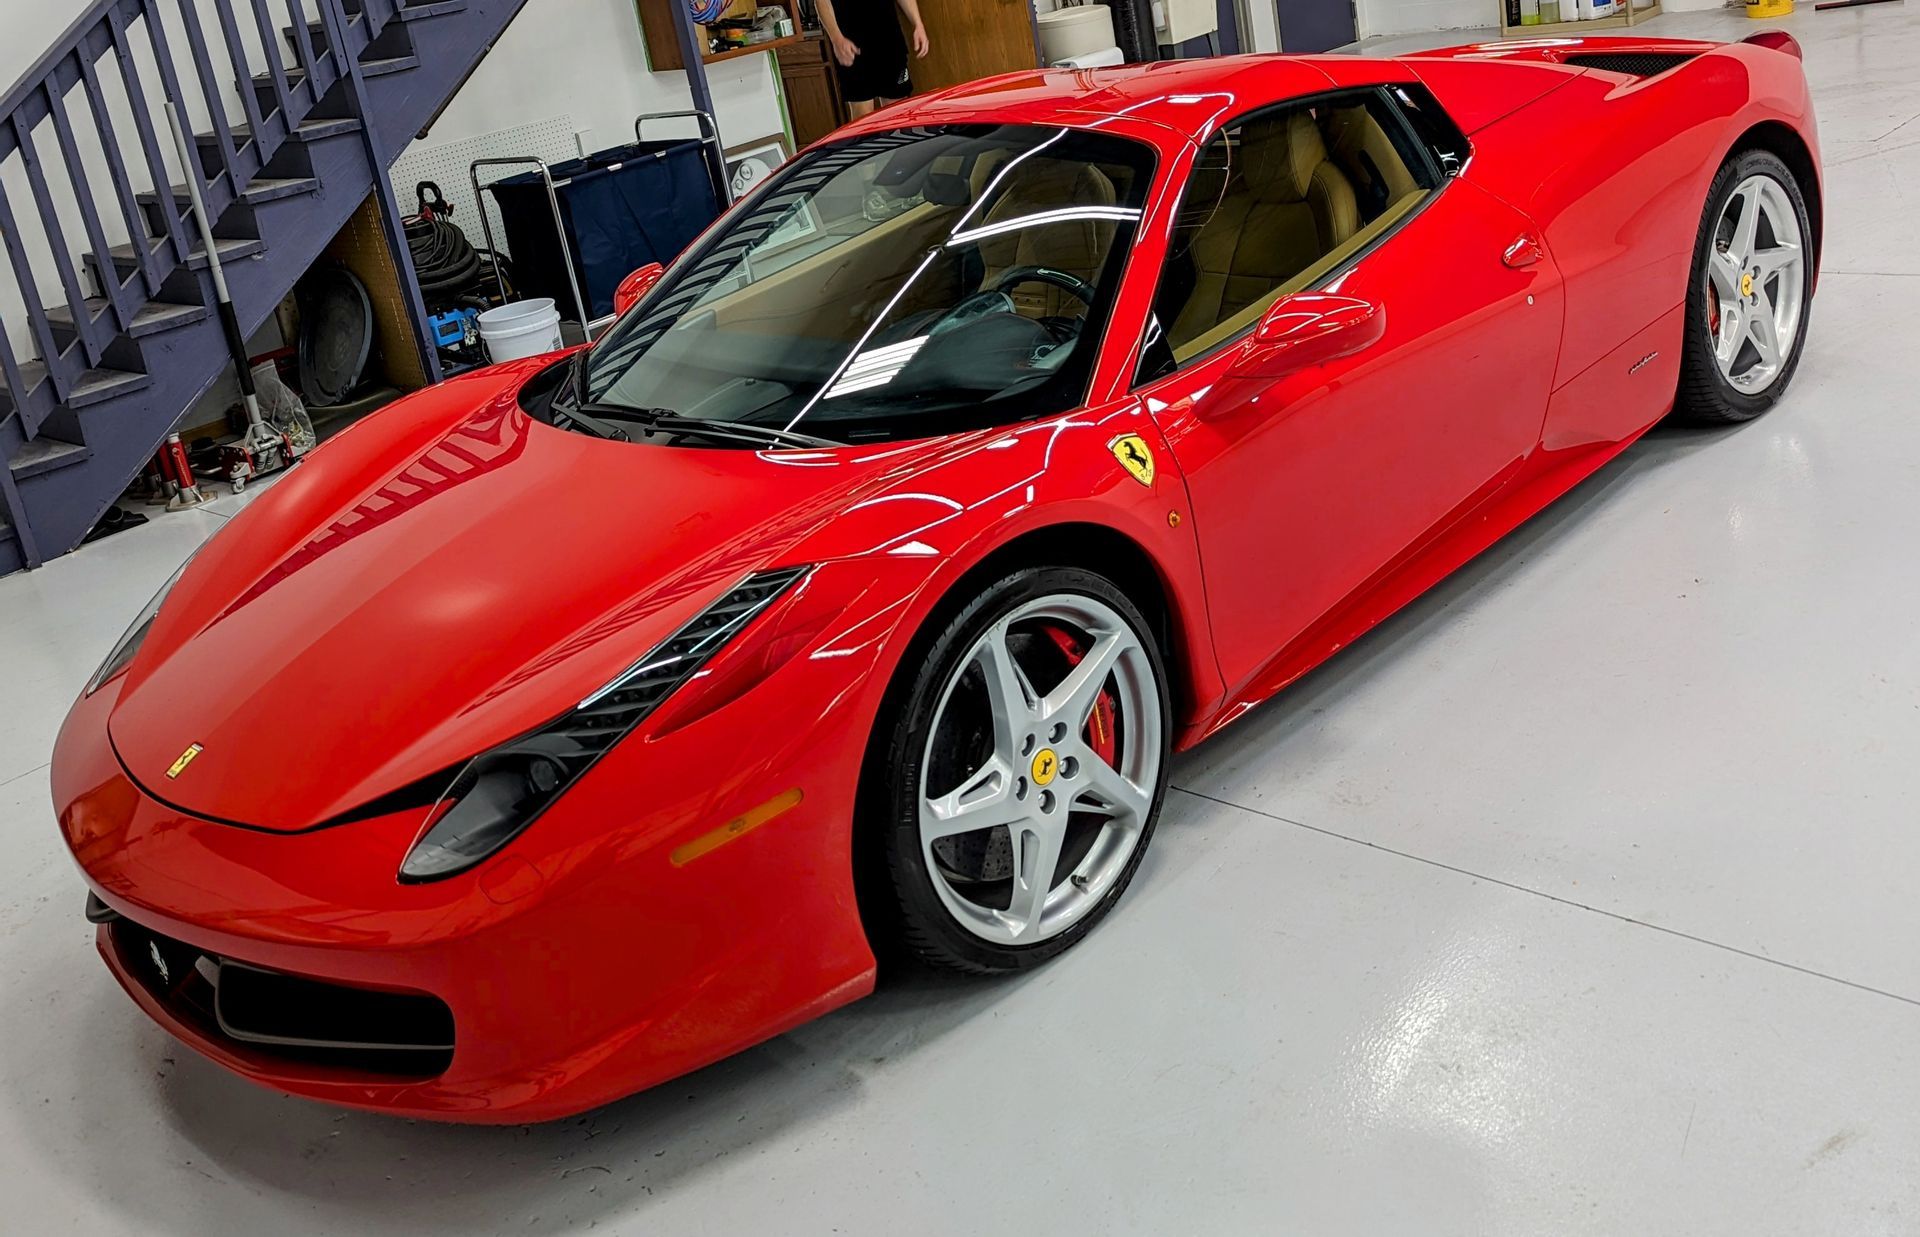 A red ferrari is parked in a garage next to stairs.